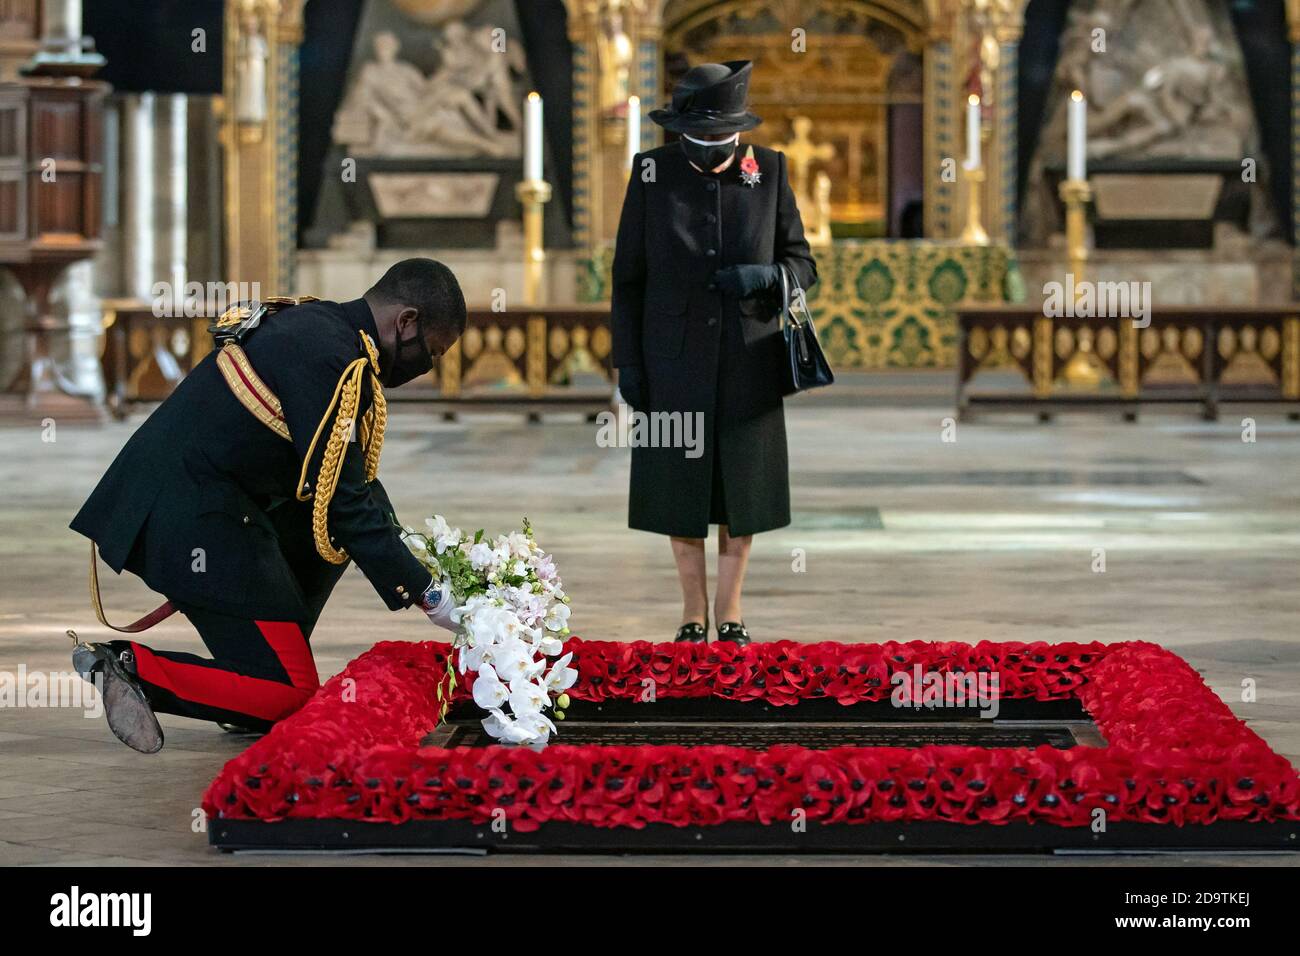 The Queen's Equerry, Lieutenant Colonel Nana Kofi Twumasi-Ankrah, places a bouquet of flowers at the grave of the Unknown Warrior on behalf of Queen Elizabeth II (centre) during a ceremony in London's Westminster Abbey. Stock Photo